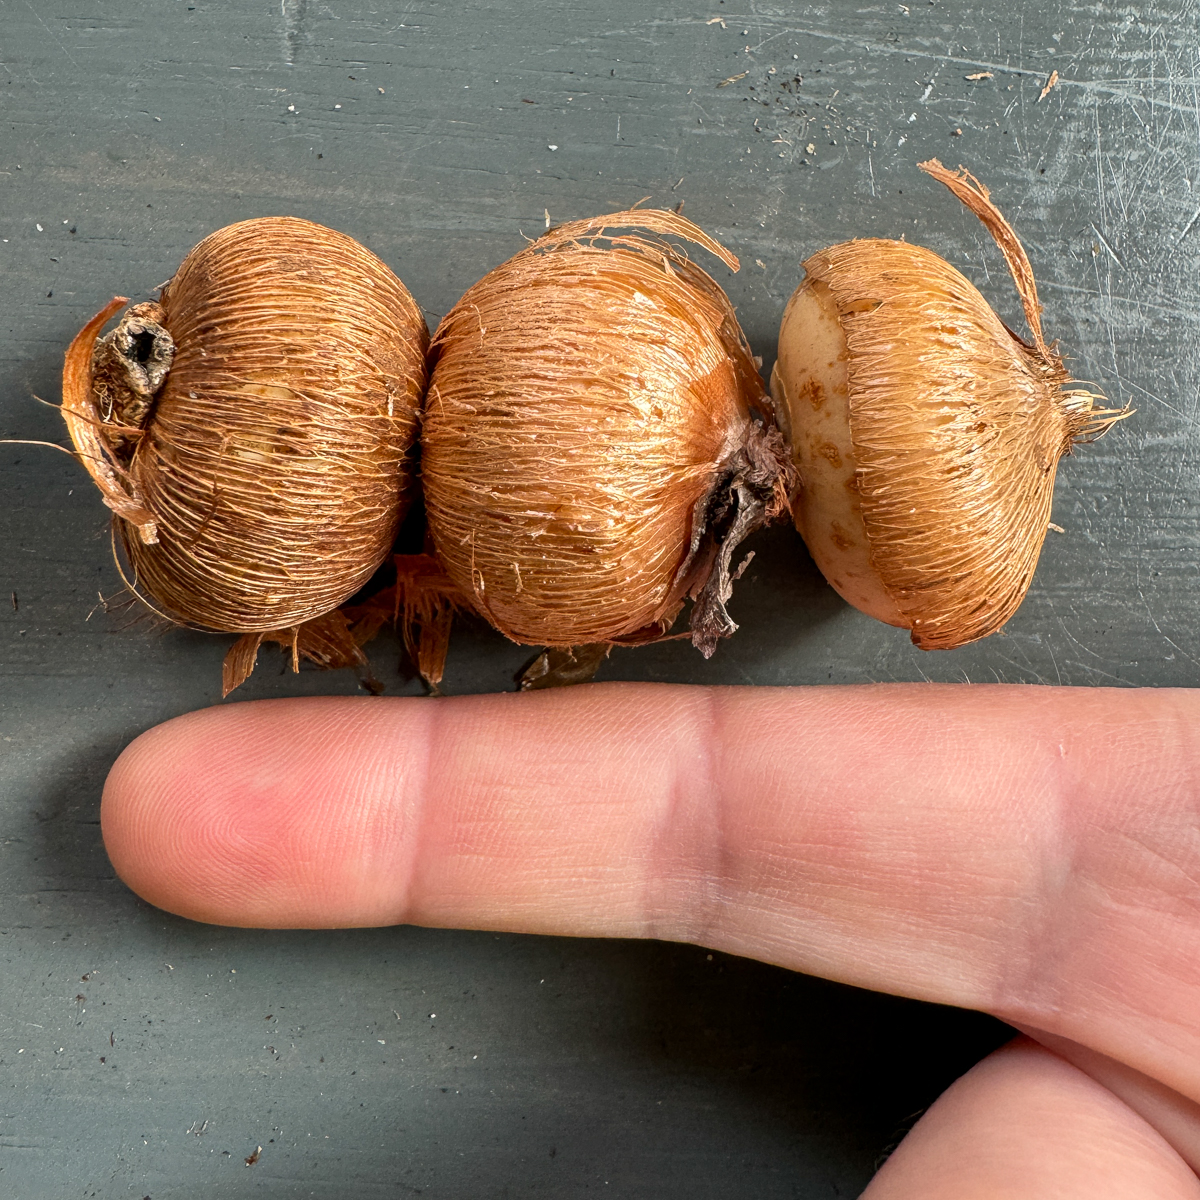 measuring the depth of three crocus bulbs stacked together against my finger